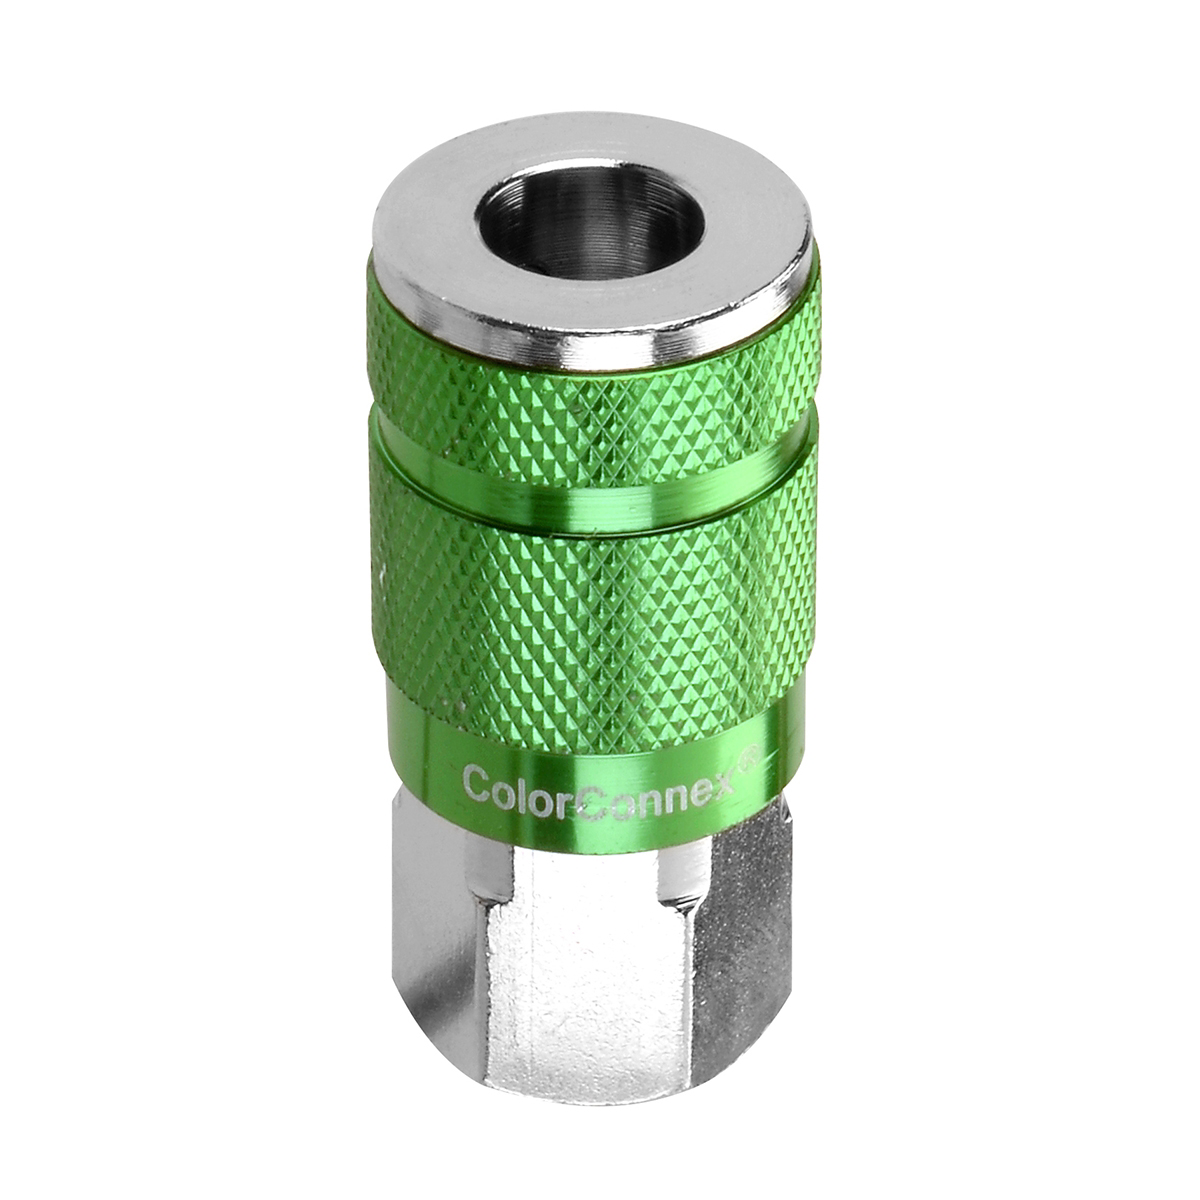 ColorConnex Body Coupler 1/4 Inch Type B ARO Green 1/4 Inch FNPT